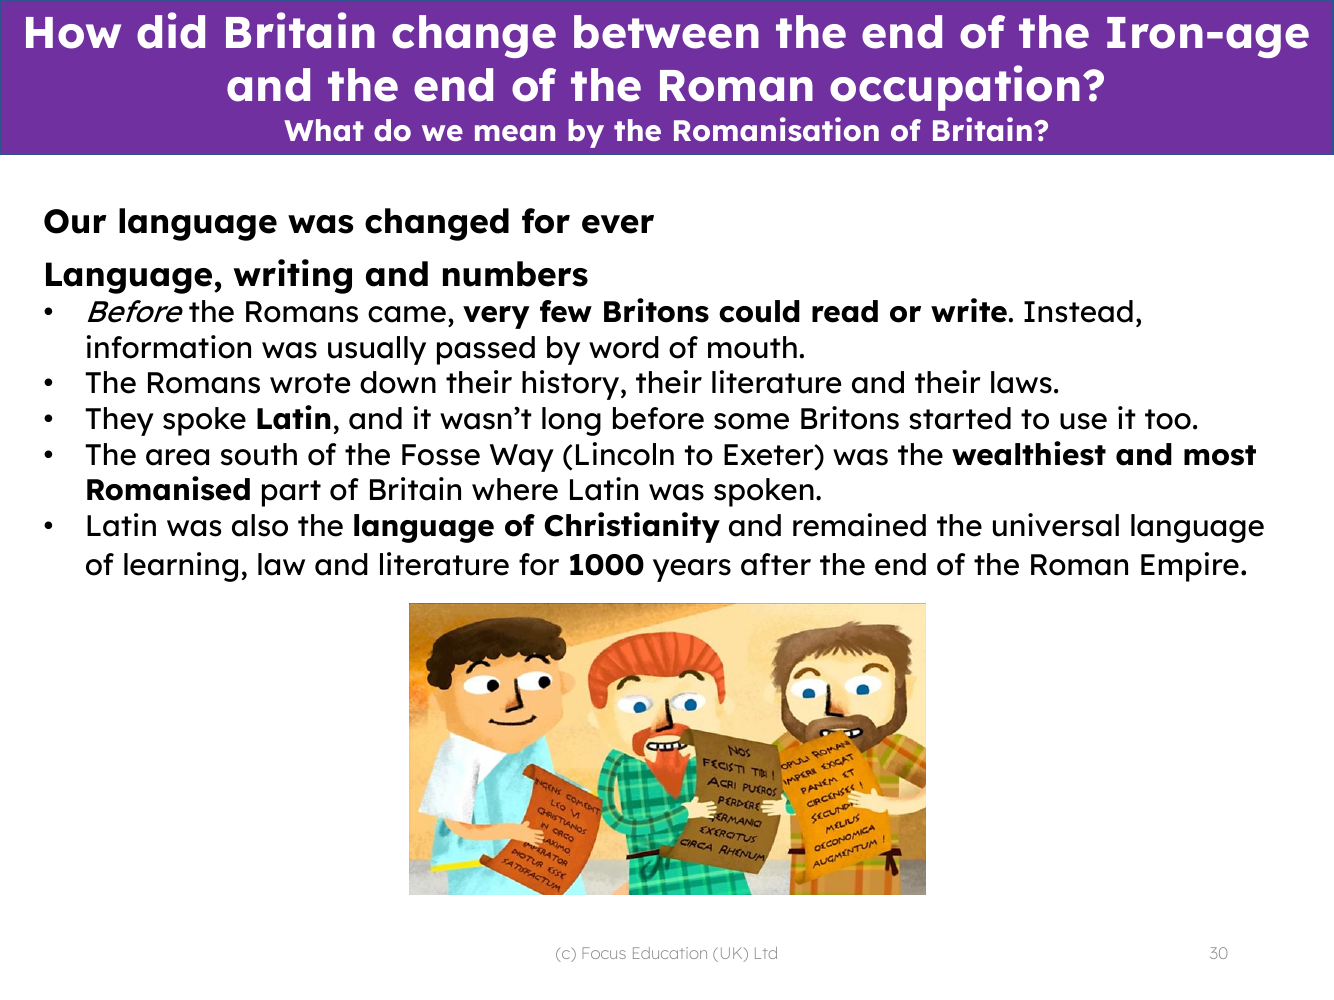 How the Romans changed language - Info sheet